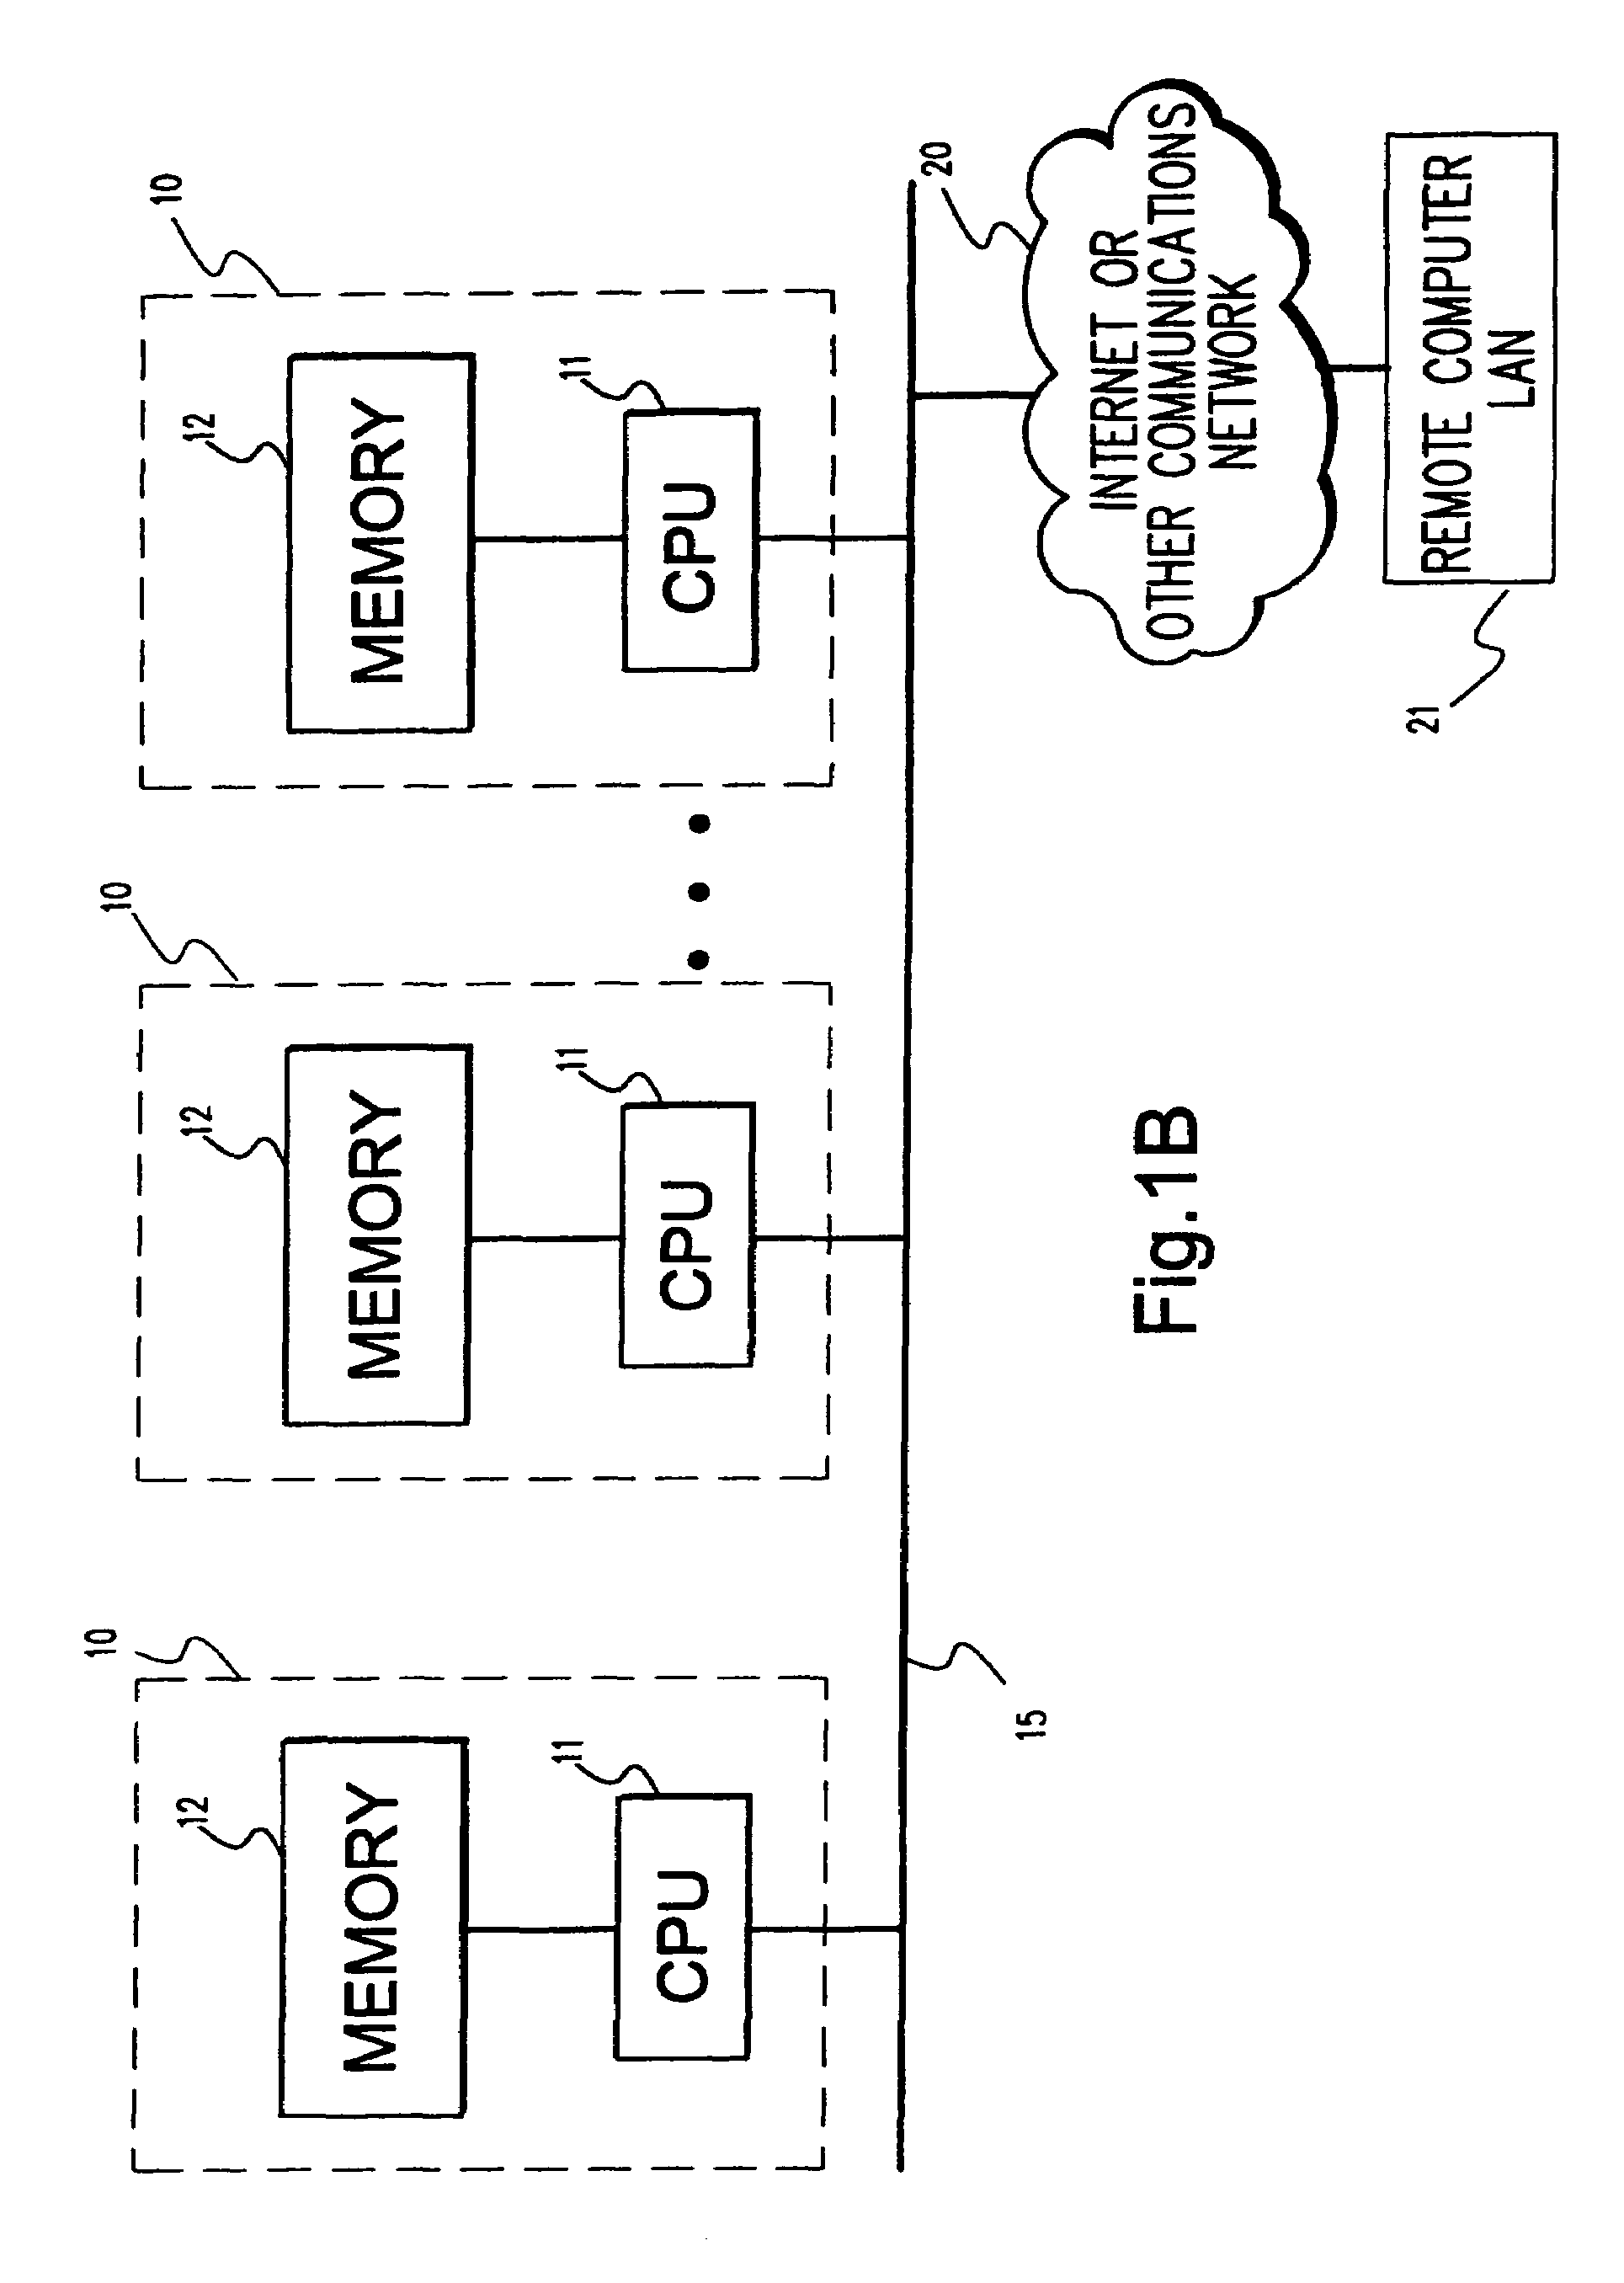 Method and apparatus for evaluating robustness of proposed solution to constraint problem and considering robustness in developing a constraint problem solution